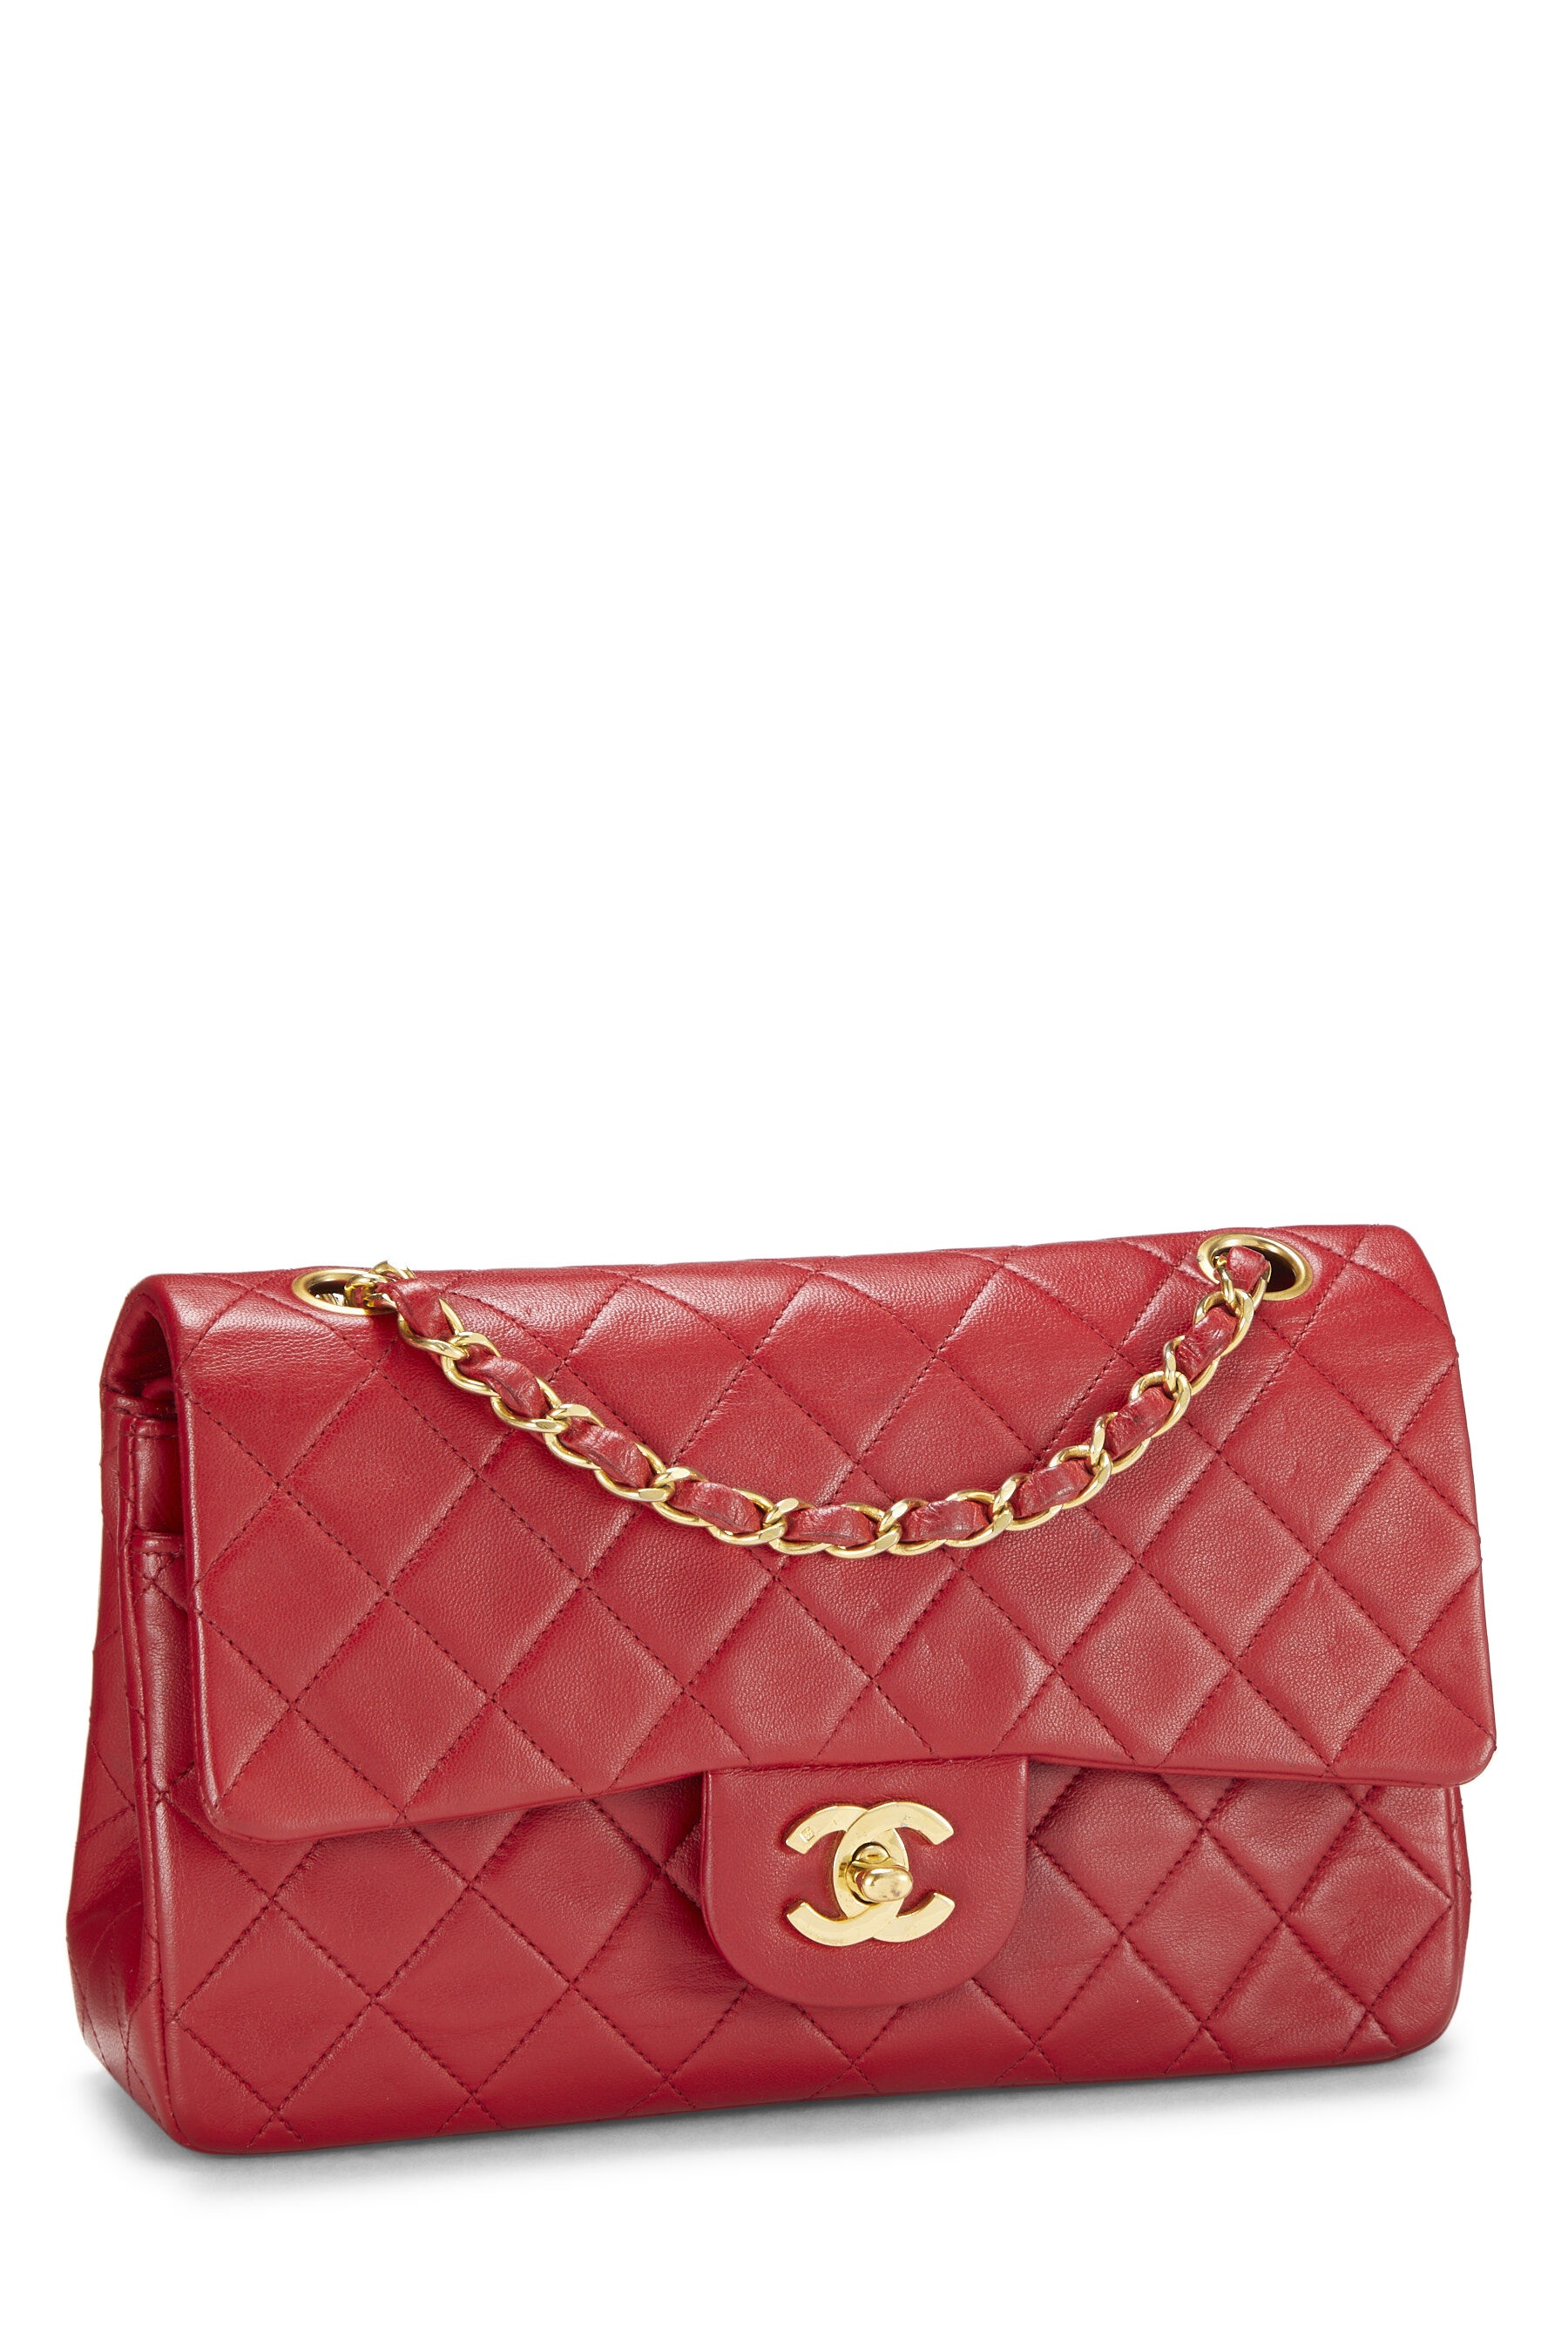 Chanel No. 20 Quilted Geometric Flap Bag in Red Lambskin